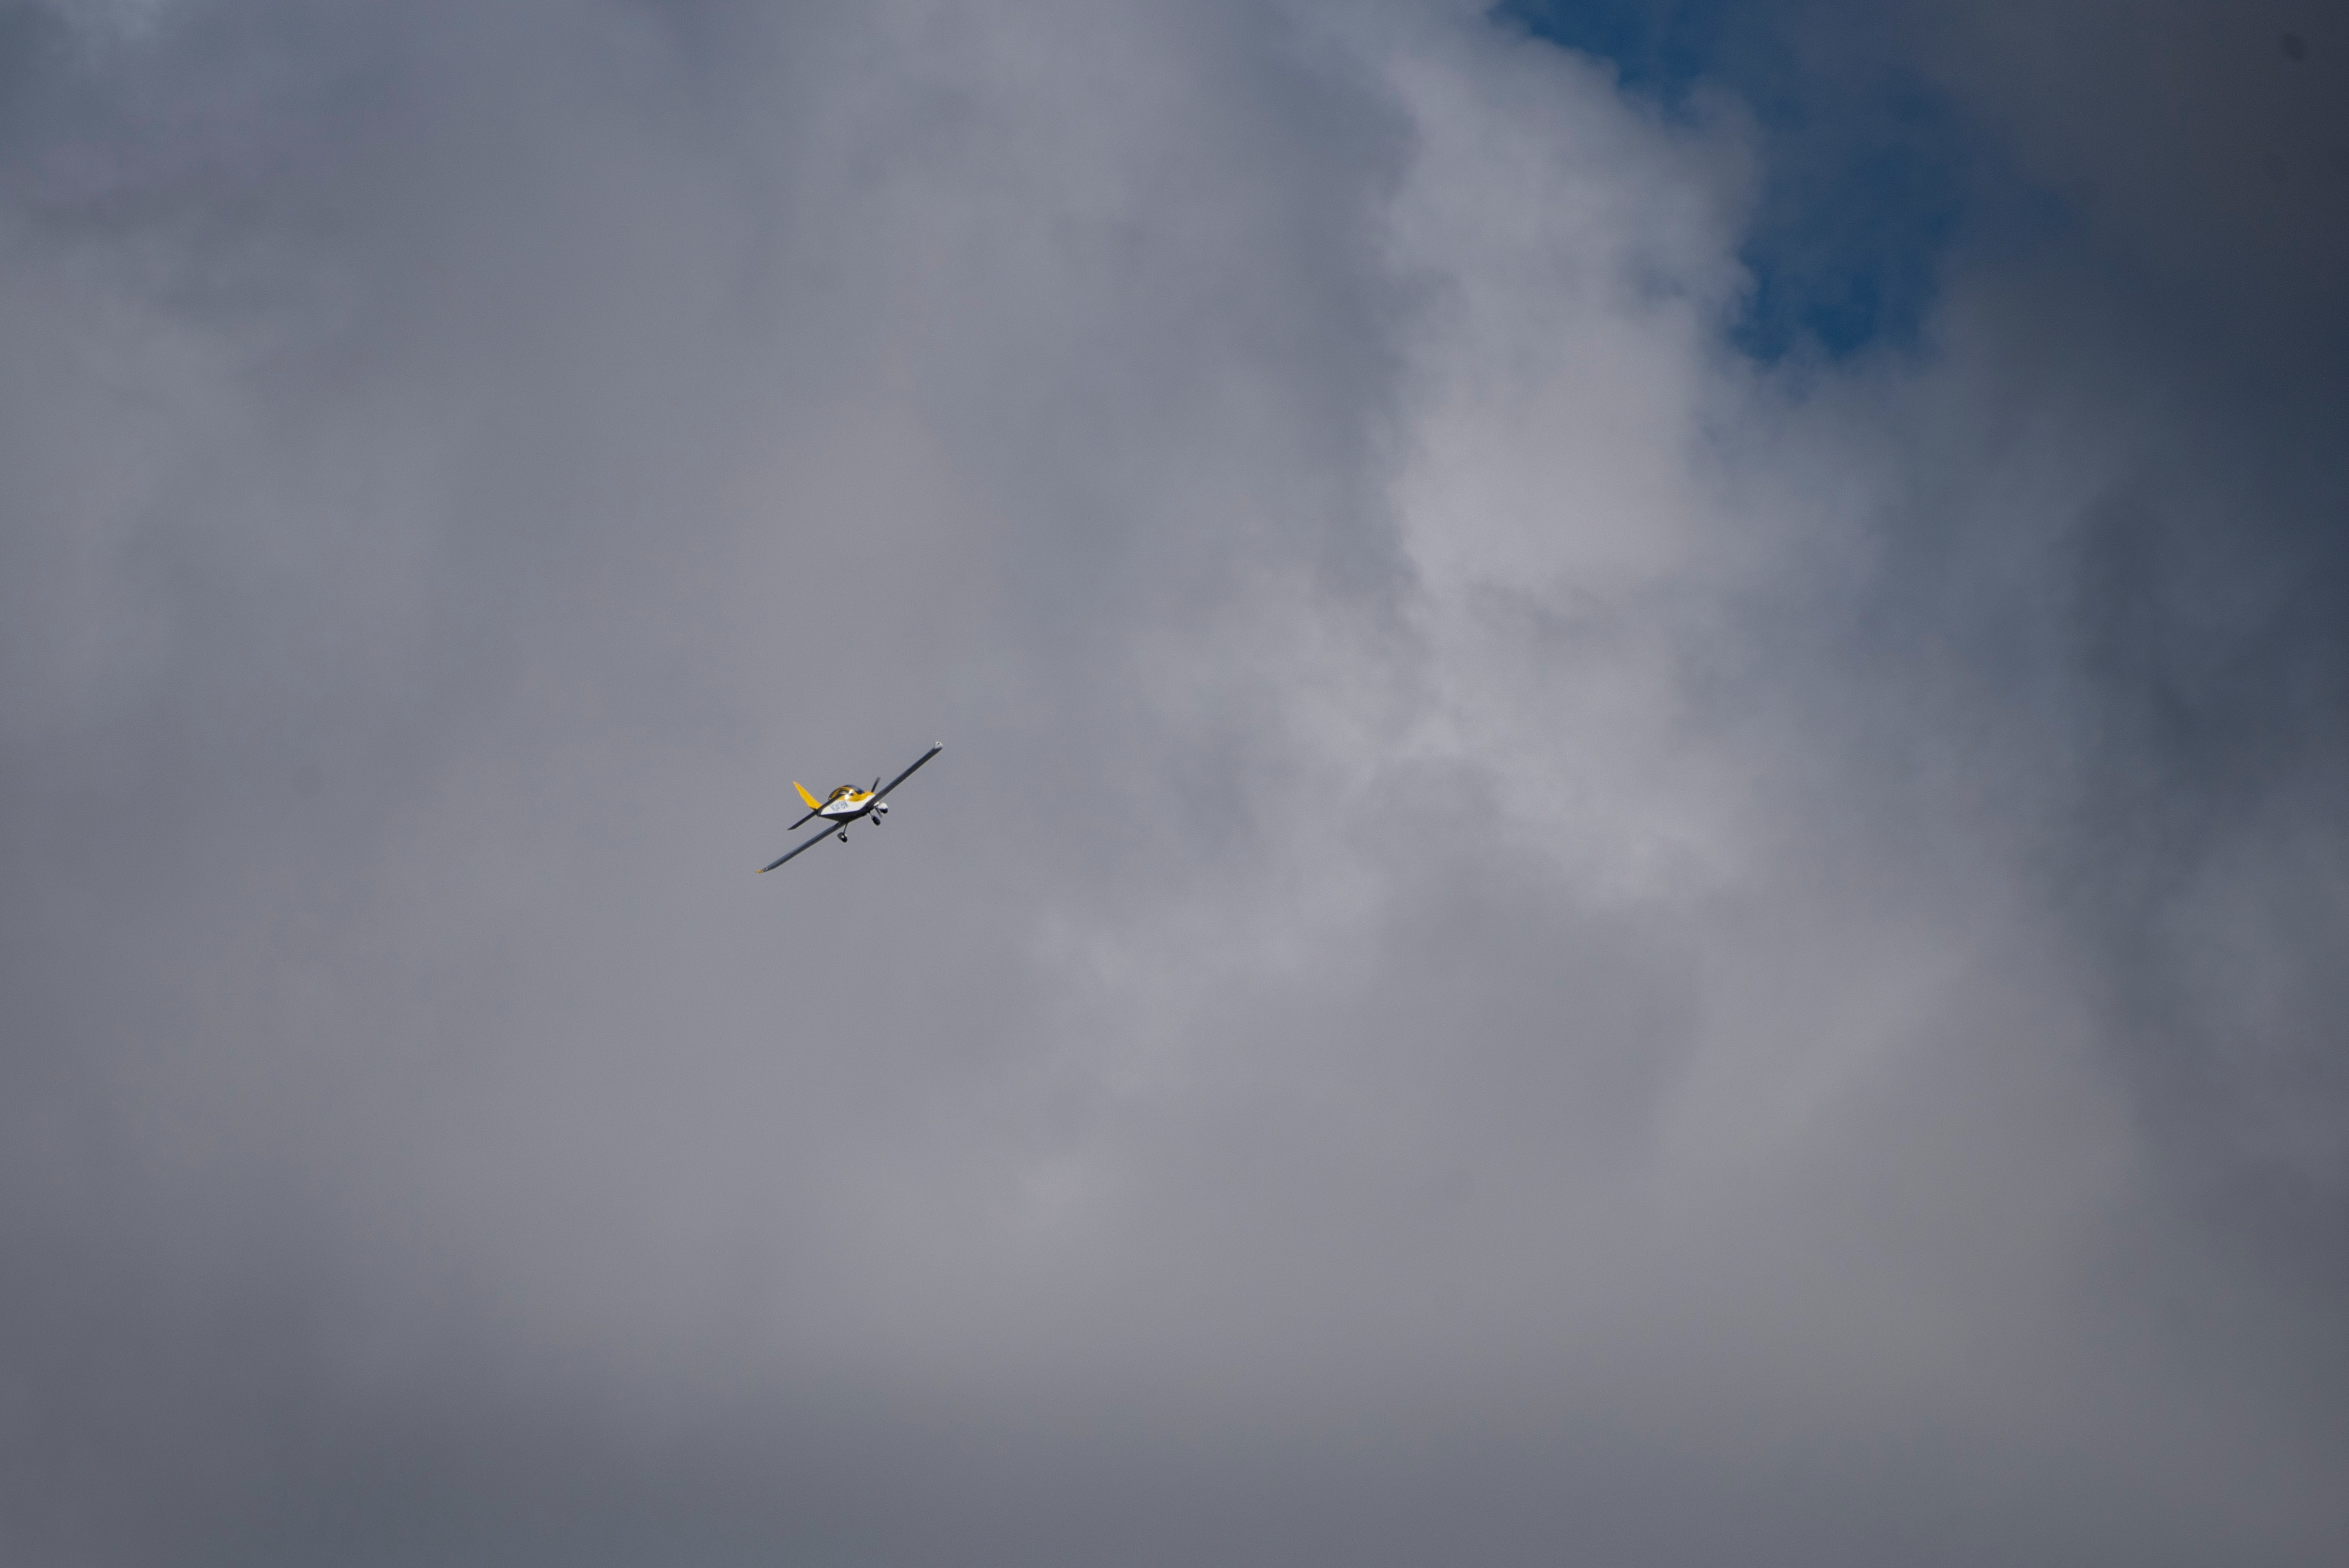 General aviation training airplane ascending into the clouds